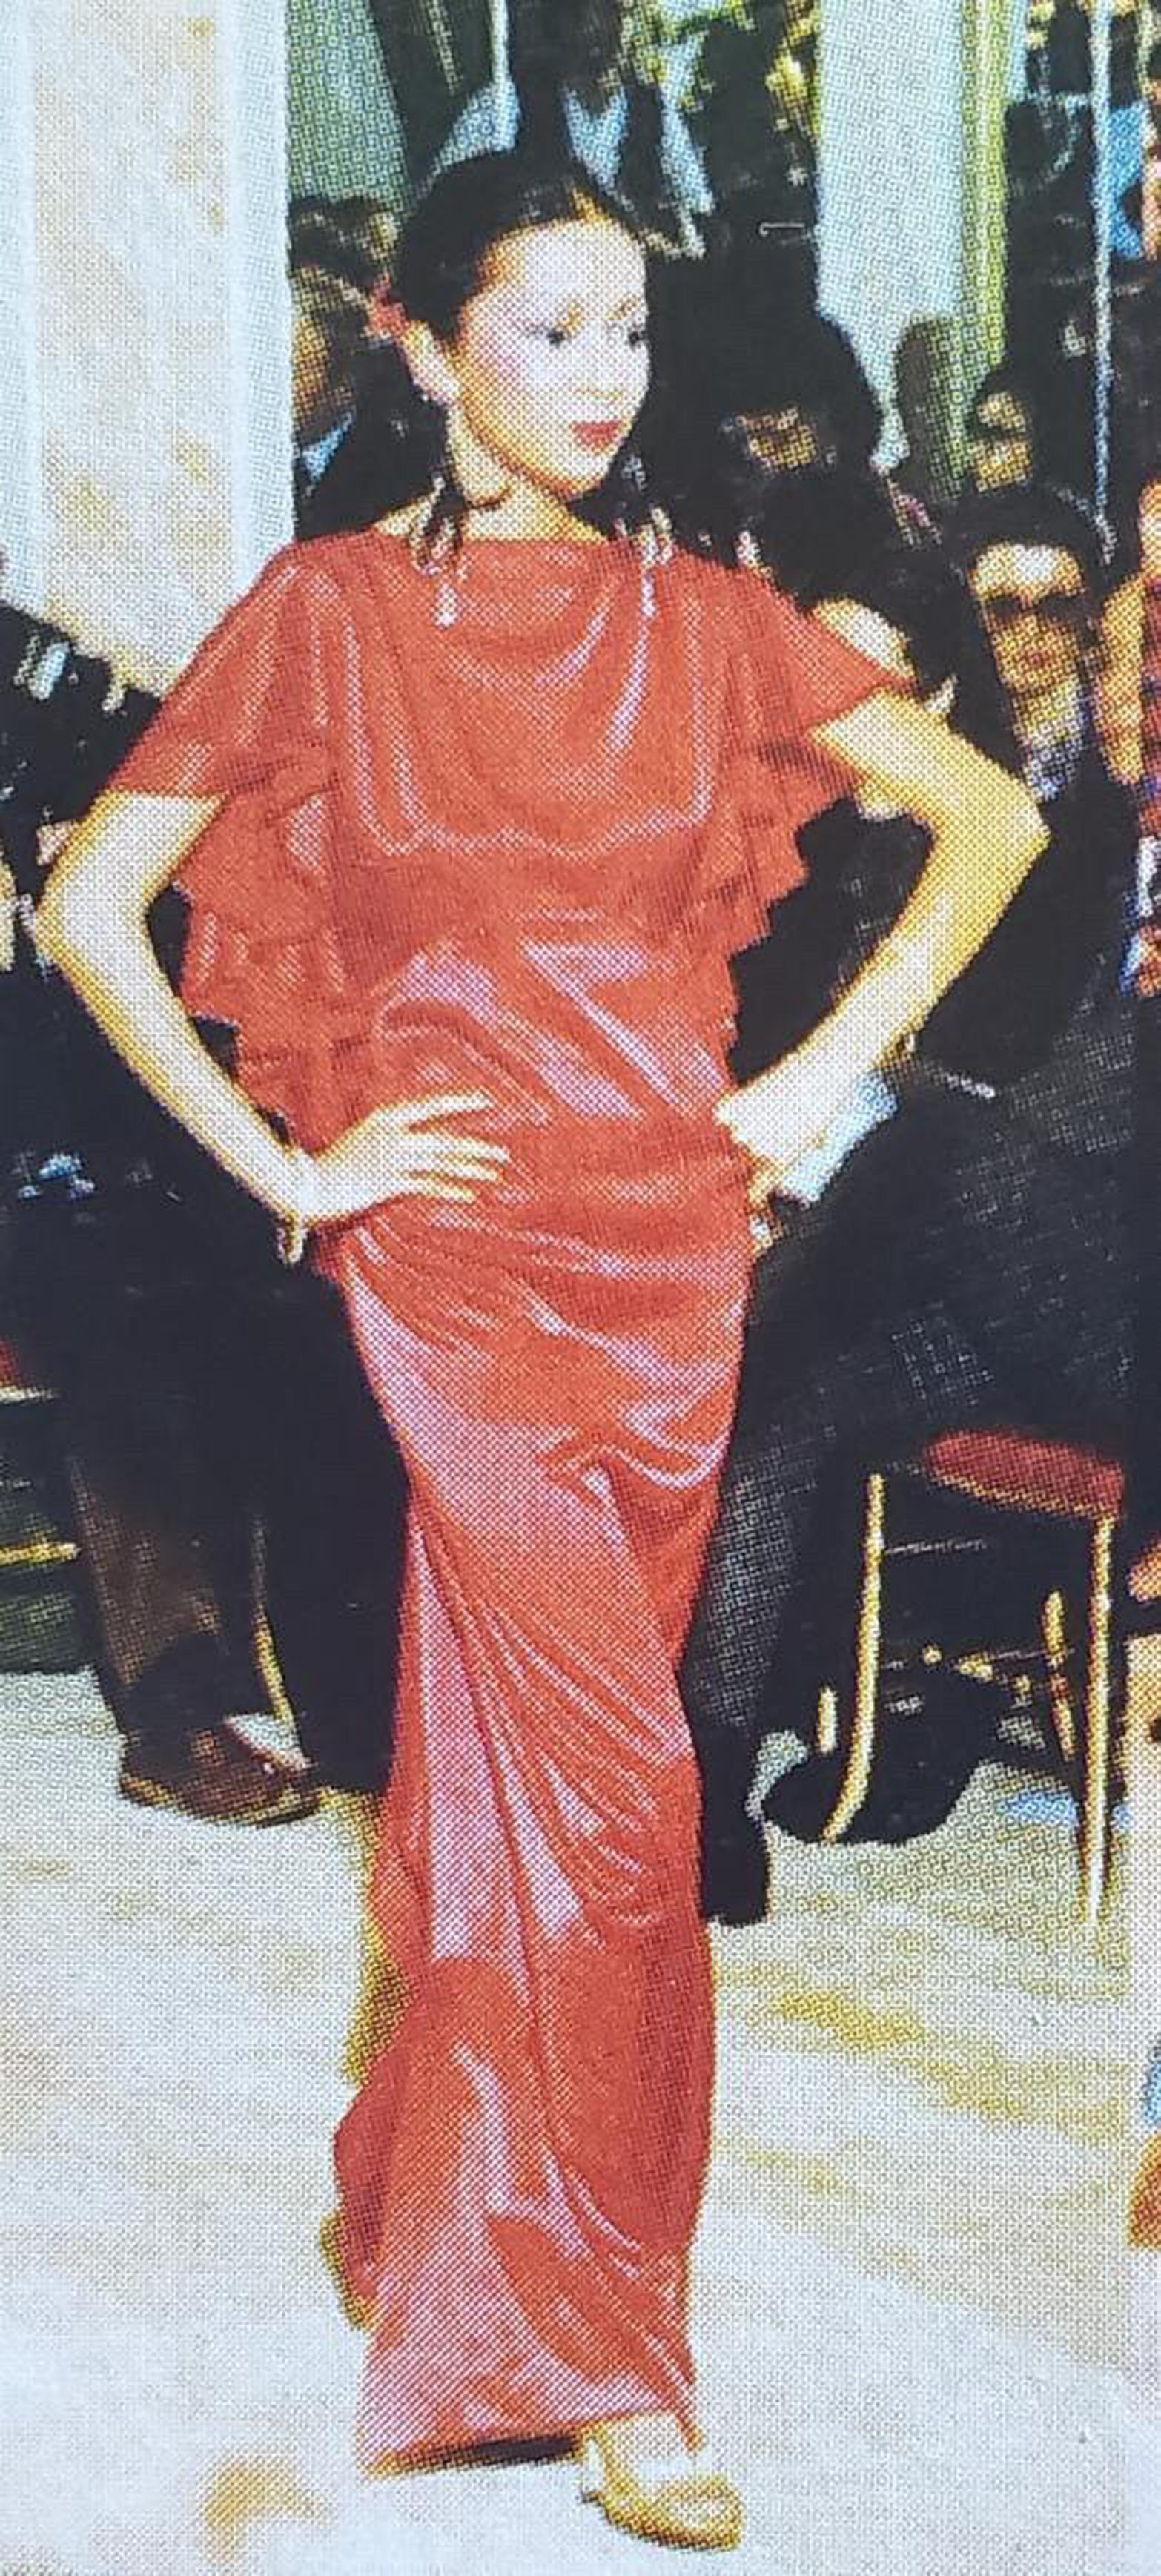 Gorgeous Yves Saint Laurent documented couture gown from his iconic 1979 spring-summer collection. We found the garment to be just as fabulous worn backwards so we styled both ways for you! It is insanely chic with its unique flamenco flutter. The